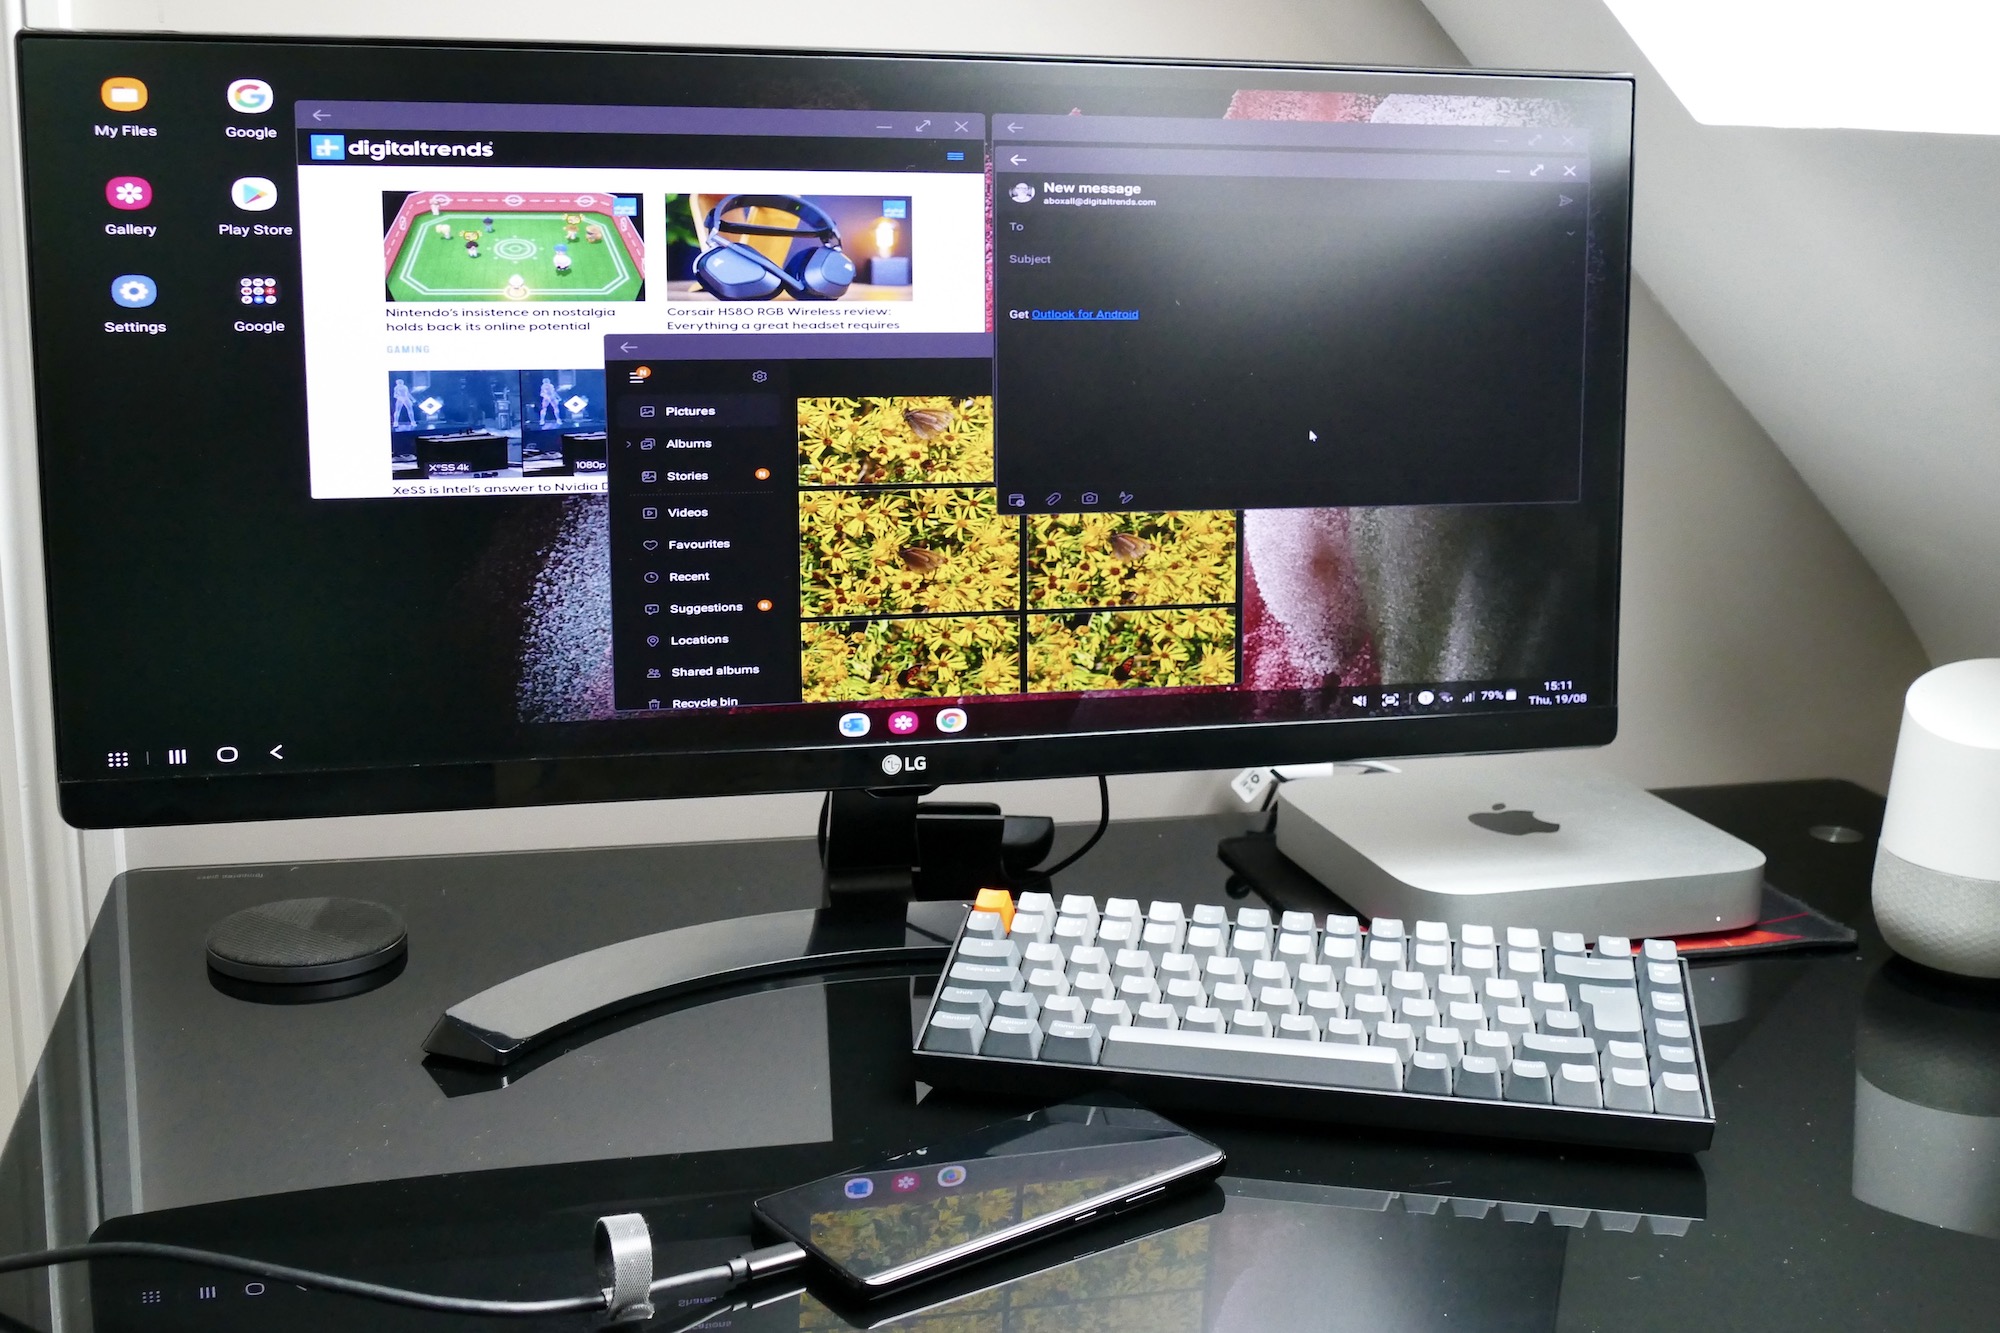 Can Samsung DeX Really Replace Your College Laptop?